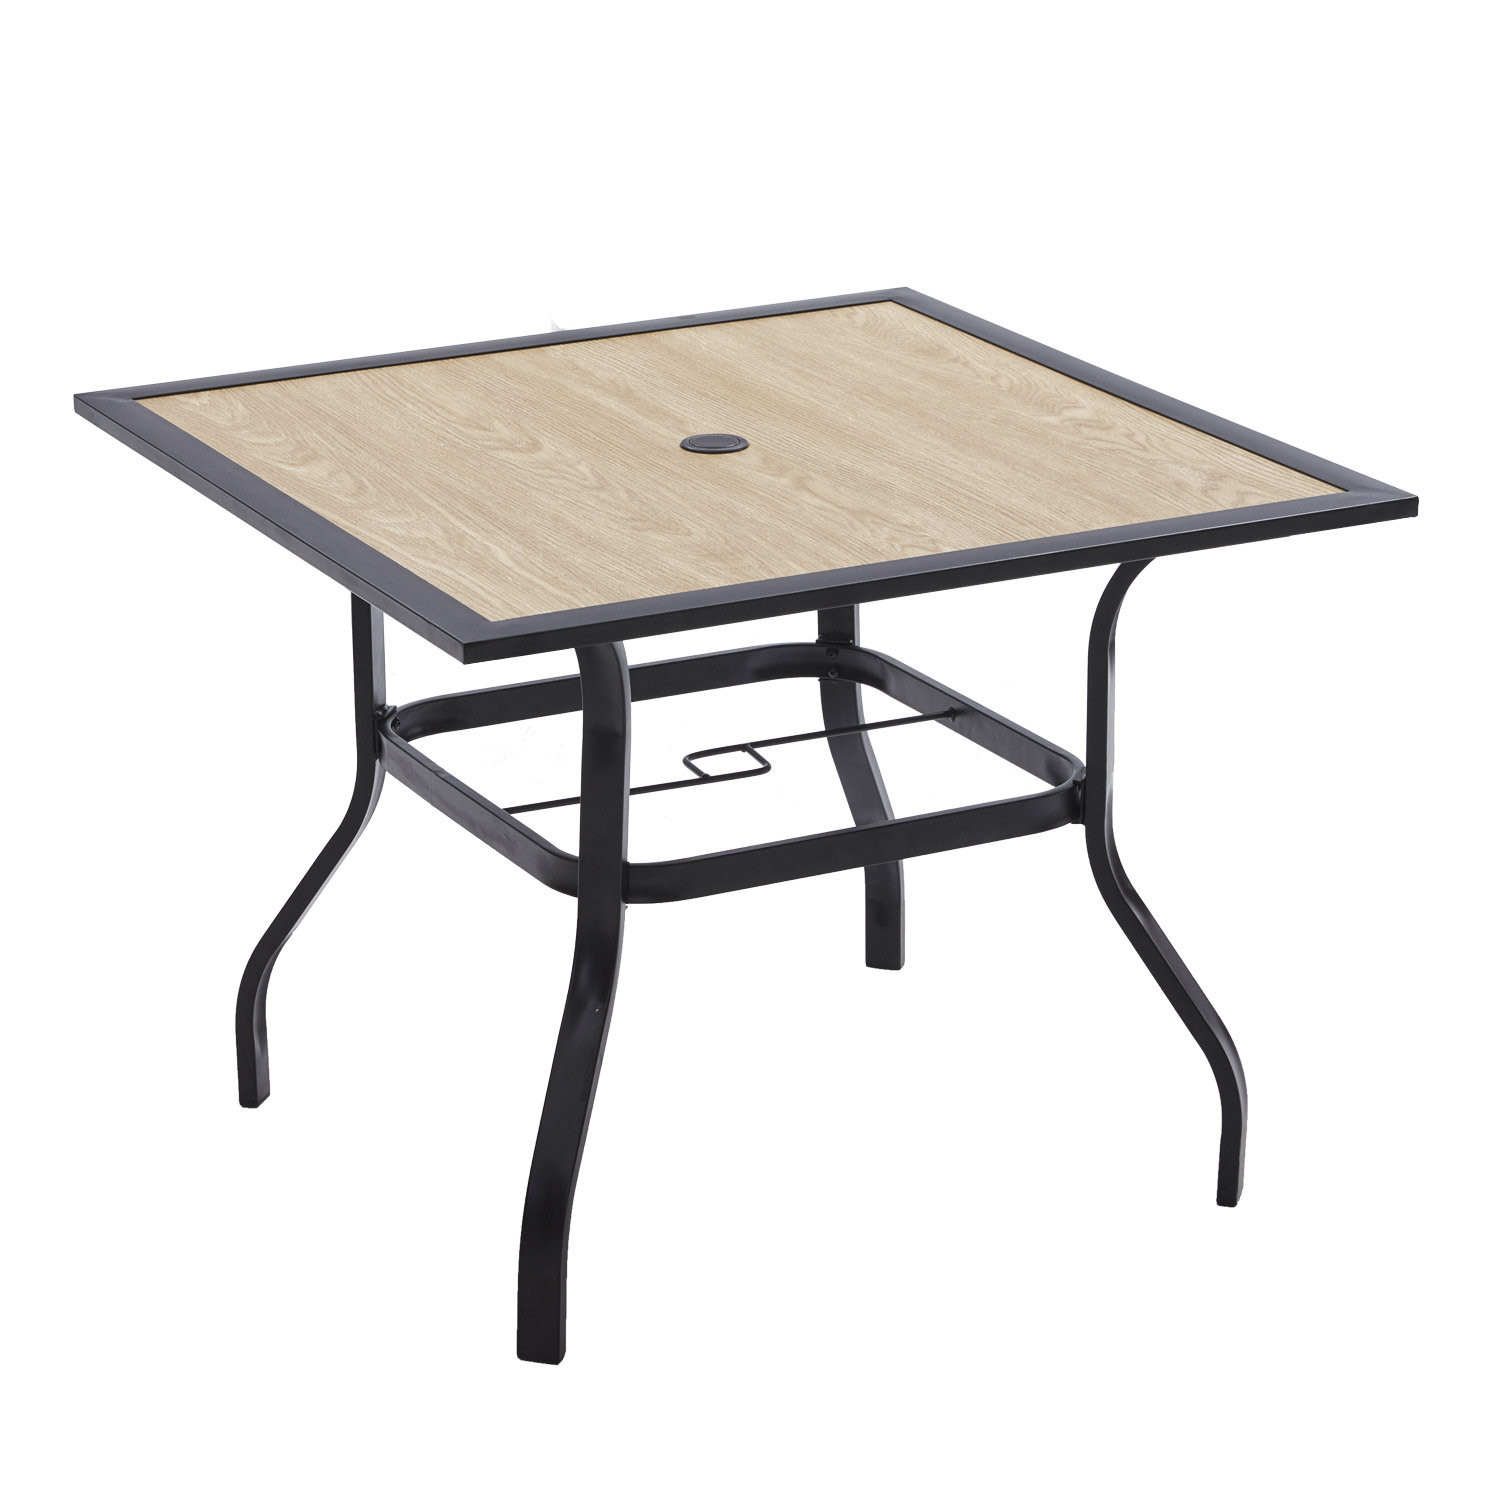 Lark Manor Hesson Outdoor Dining Table & Reviews